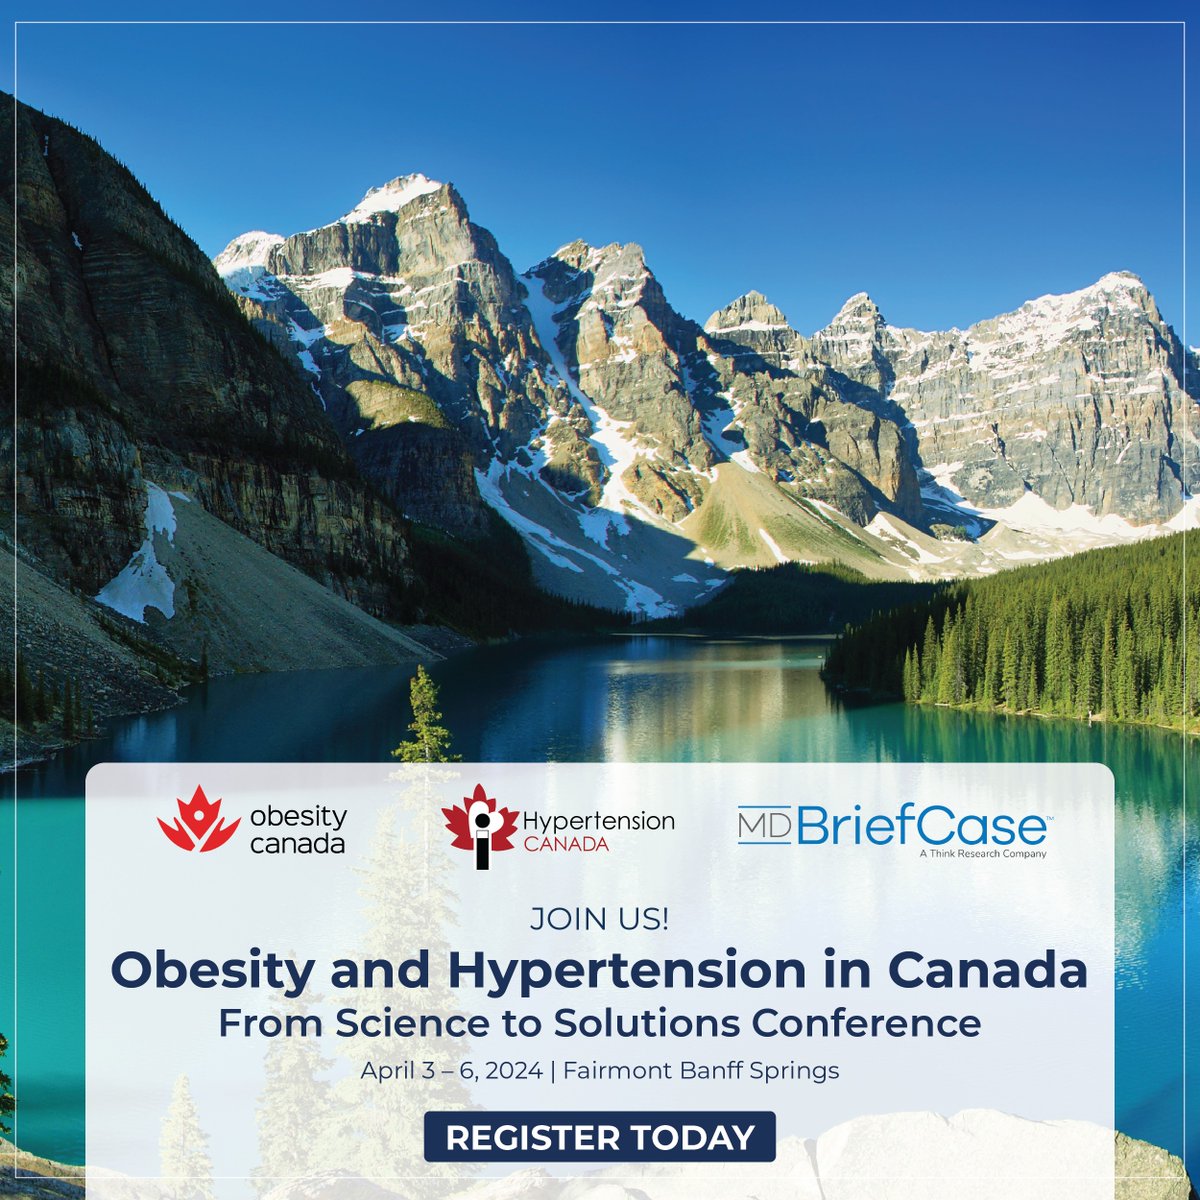 Join us at this engaging 4-day event hosted by @ObesityCan & @HTNCanada to learn the latest advancements in #obesity and #hypertension research. 🩺 Comprehensive agenda with 100+ presentations 🤝 Network with experts across the healthcare spectrum ow.ly/l9Xh50QIxgN